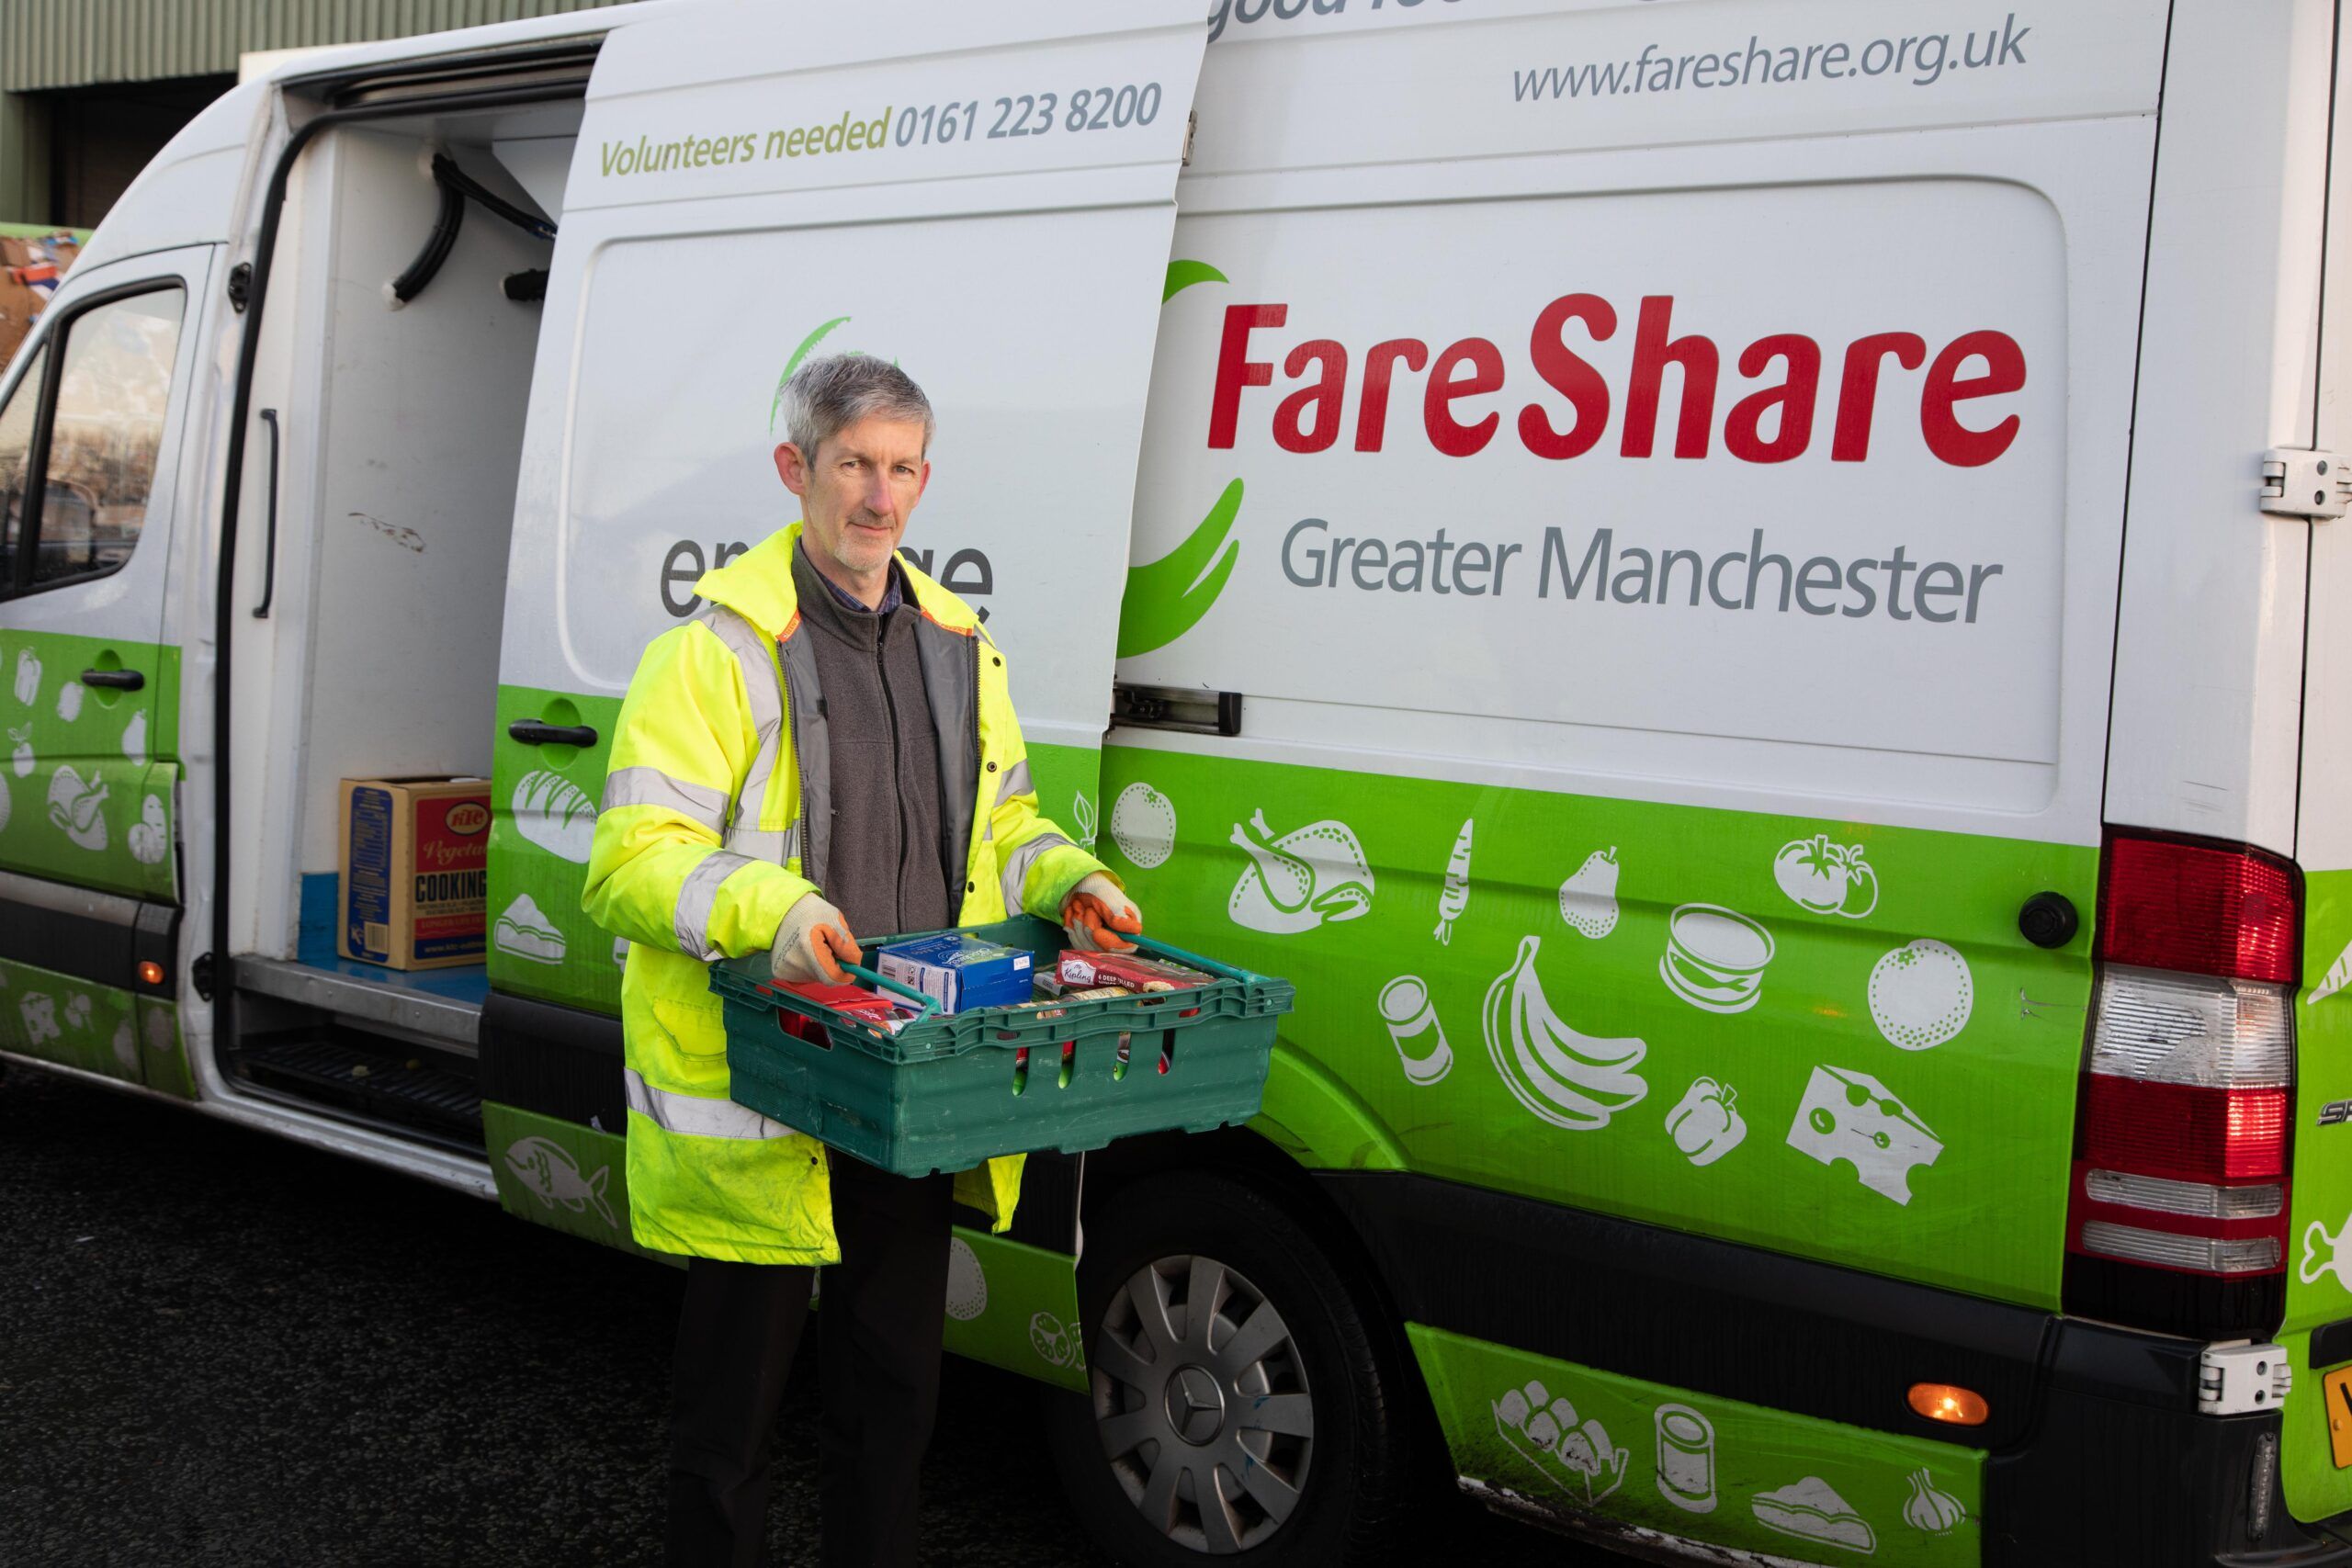 photo courtesy of Mark Hobbs at FareShare Greater Manchester